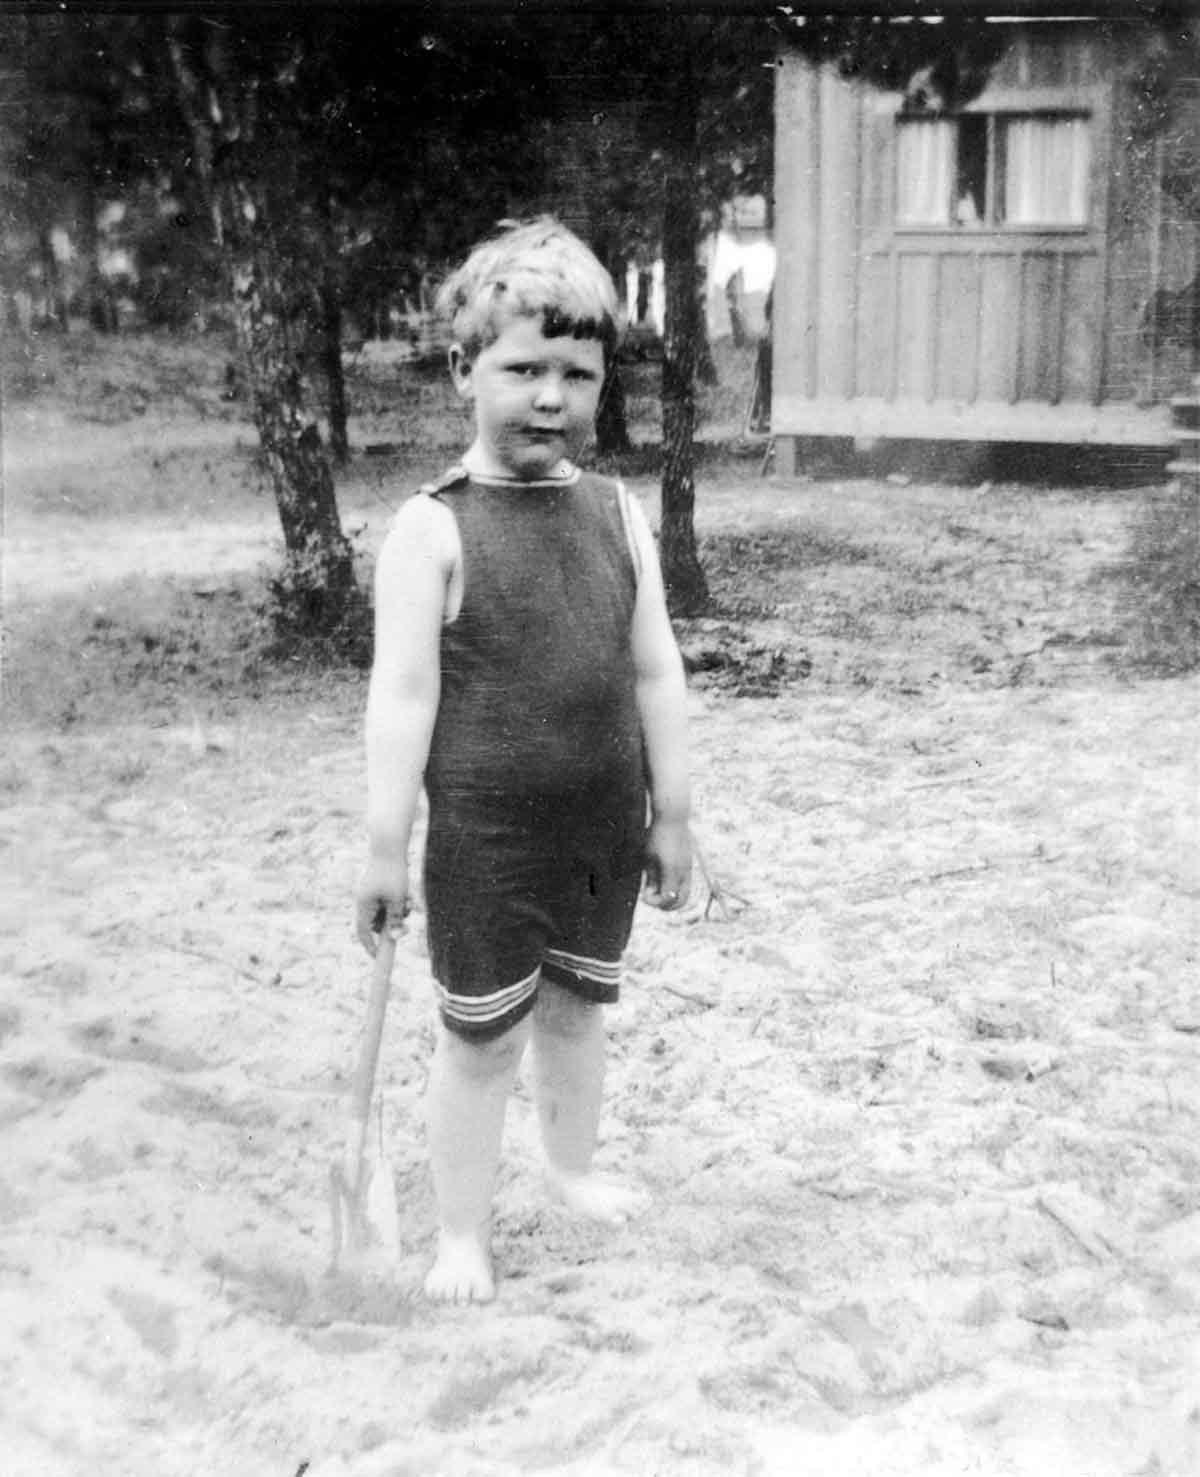 An image of James Beard as a child, featured in the podcast Talking With My Mouth Full Ep. 34: An Intimate Look at James Beard with John Birdsall.